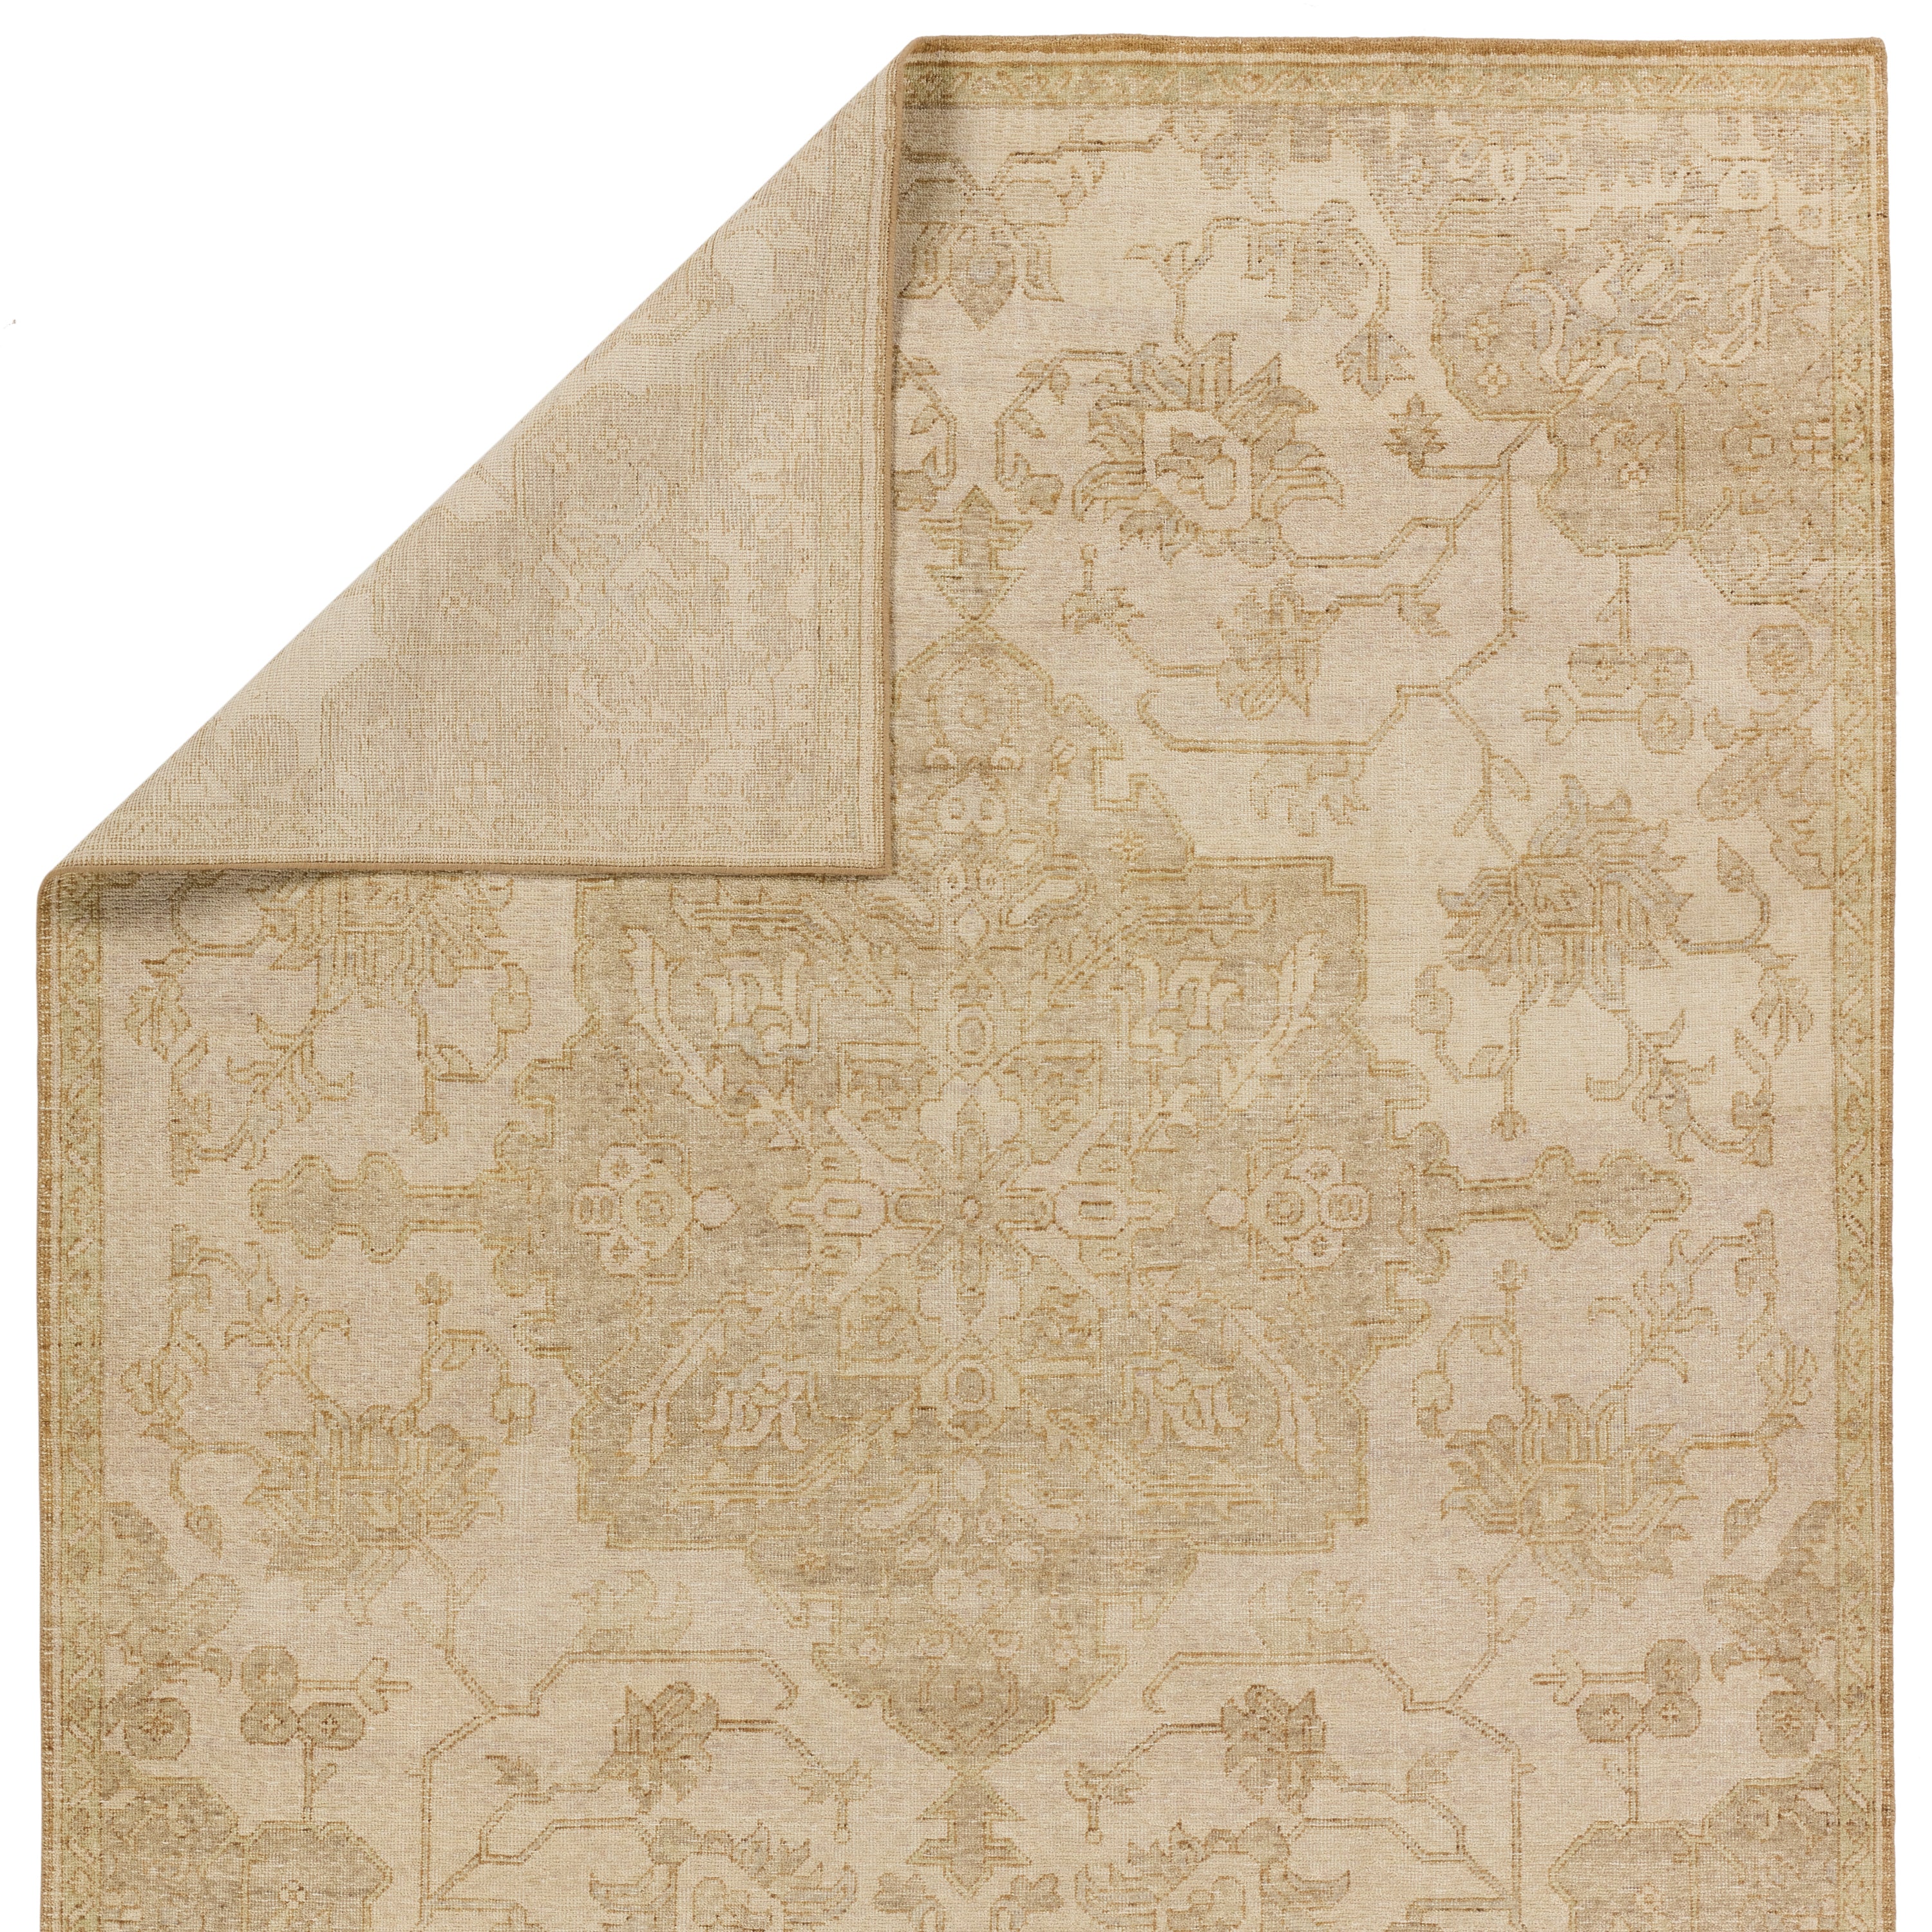 The Onessa collection marries traditional motifs with soft, subdued colorways for the perfect blend of fresh and time-honored style. These hand-knotted wool rugs feature a hand-sheared quality that lends the design a coveted vintage impression. The Danet rug features a distressed, floral pattern in hues of tan, gold, taupe, cream, and hints of green. Amethyst Home provides interior design, new construction, custom furniture, and area rugs in the Scottsdale metro area.